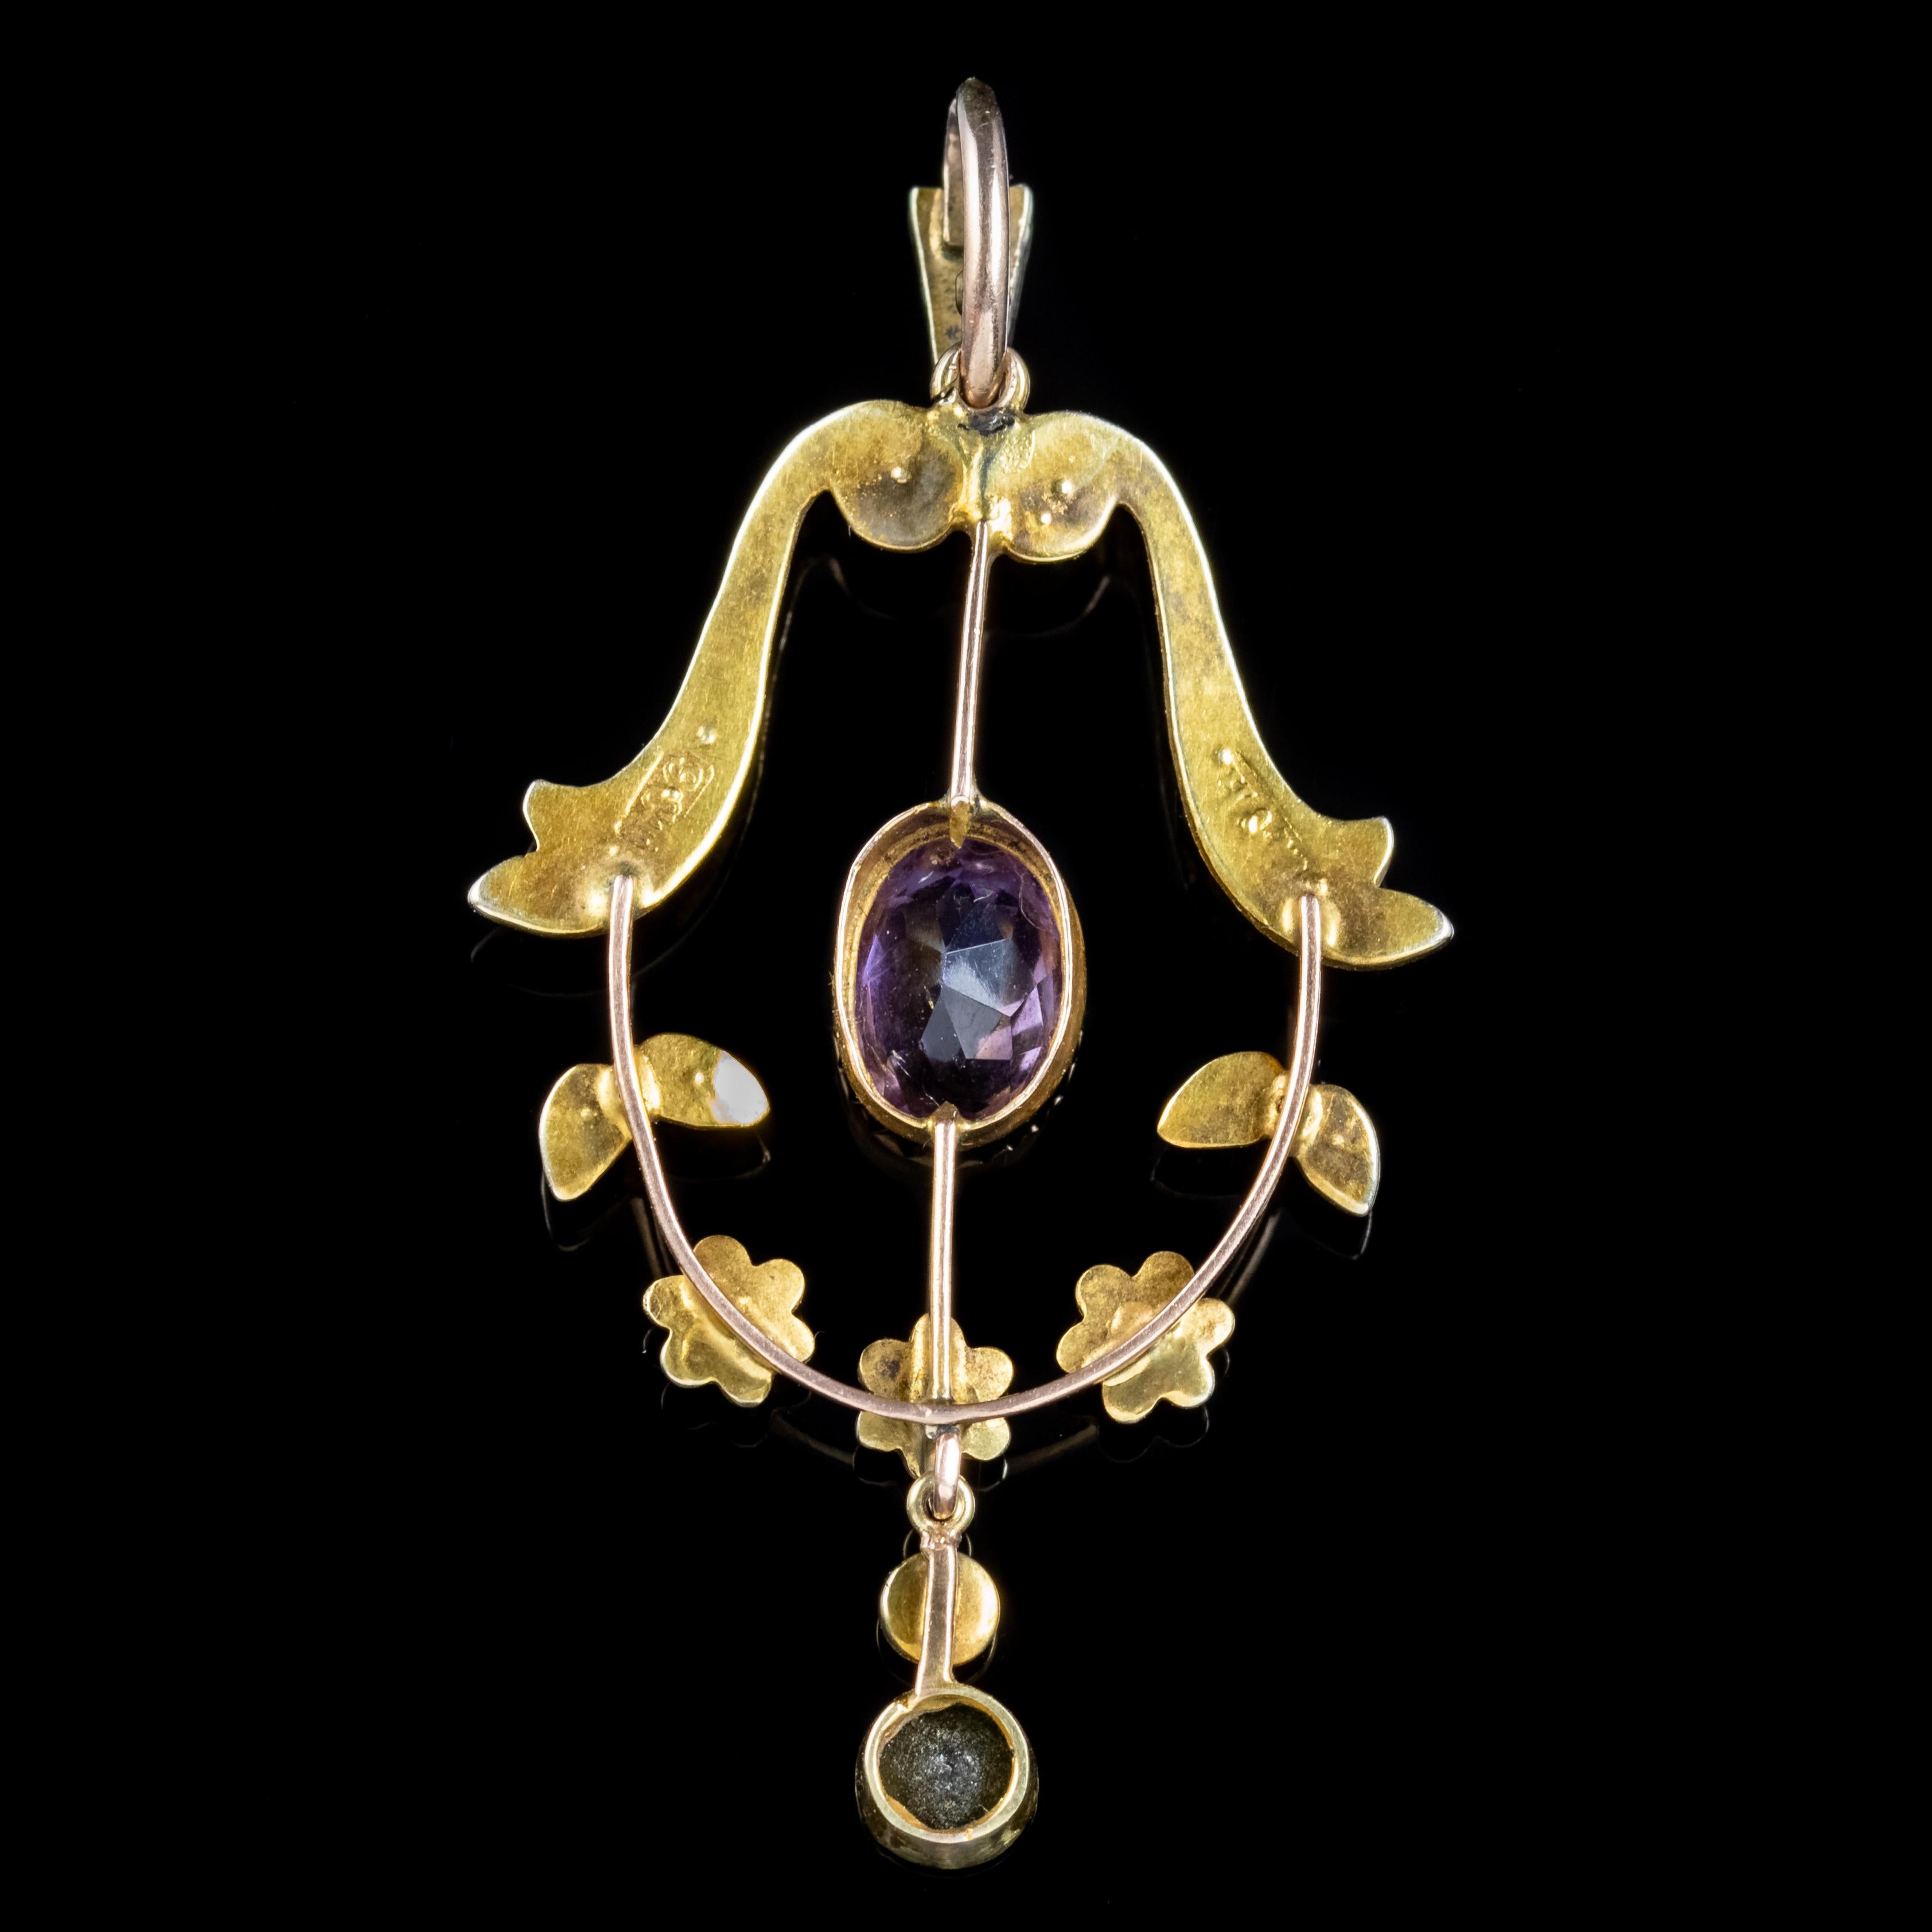 A lovely antique Edwardian Suffragette pendant decorated with Pearls, a 0.20ct Peridot dropper and a 1ct Amethyst in the centre. 

Suffragettes liked to be depicted as feminine, their jewellery popularly consisted of Violet, Green and White stones